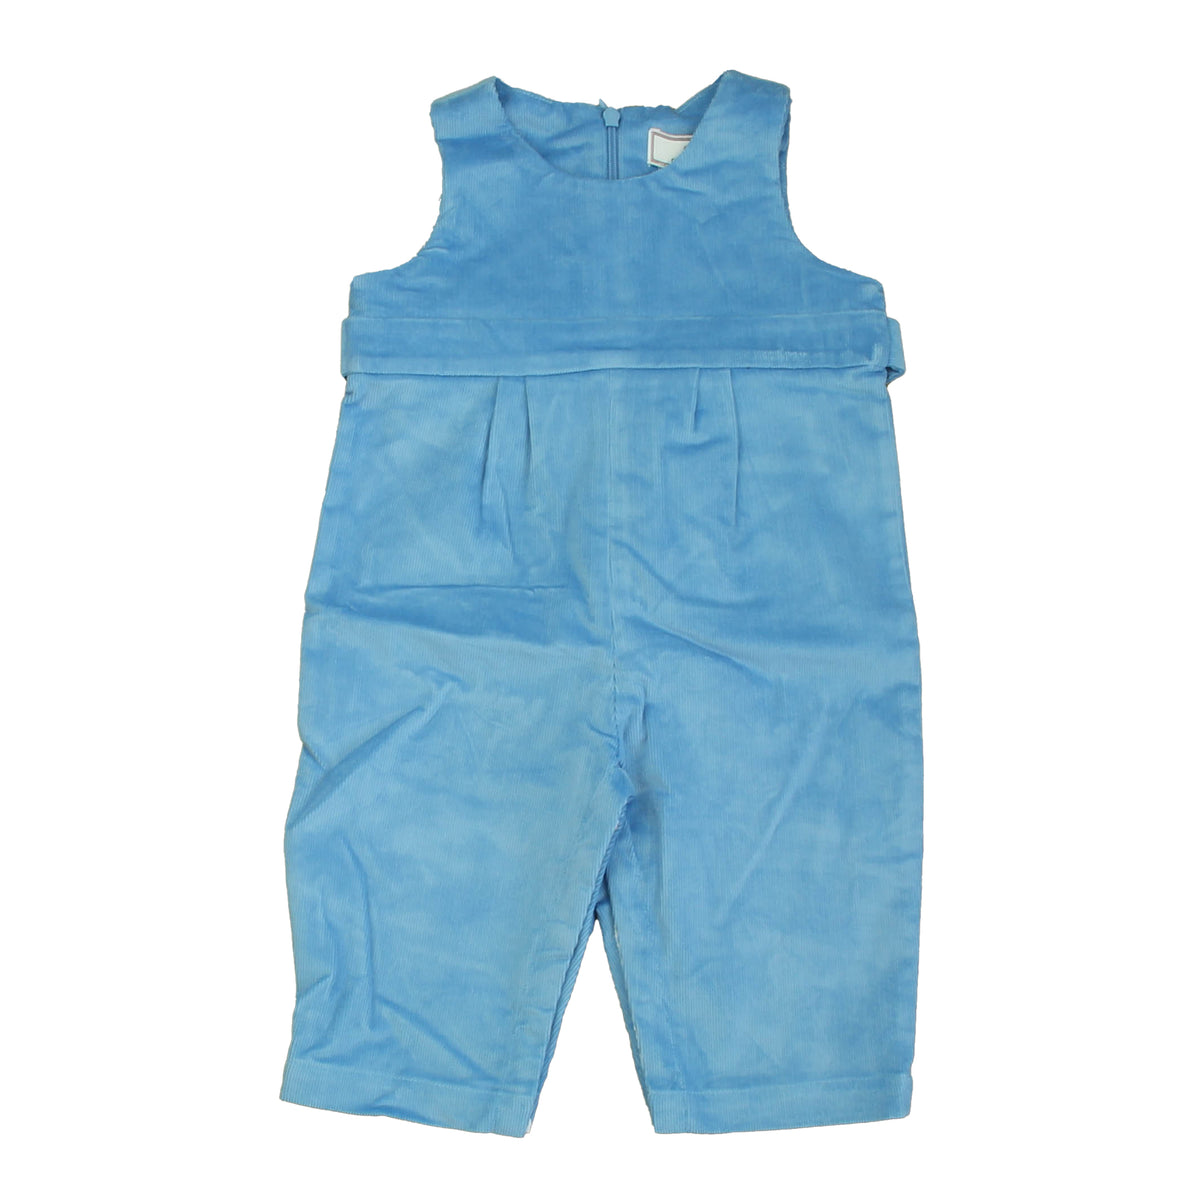 New with Tags: Alaskan Blue Pants -- FINAL SALE